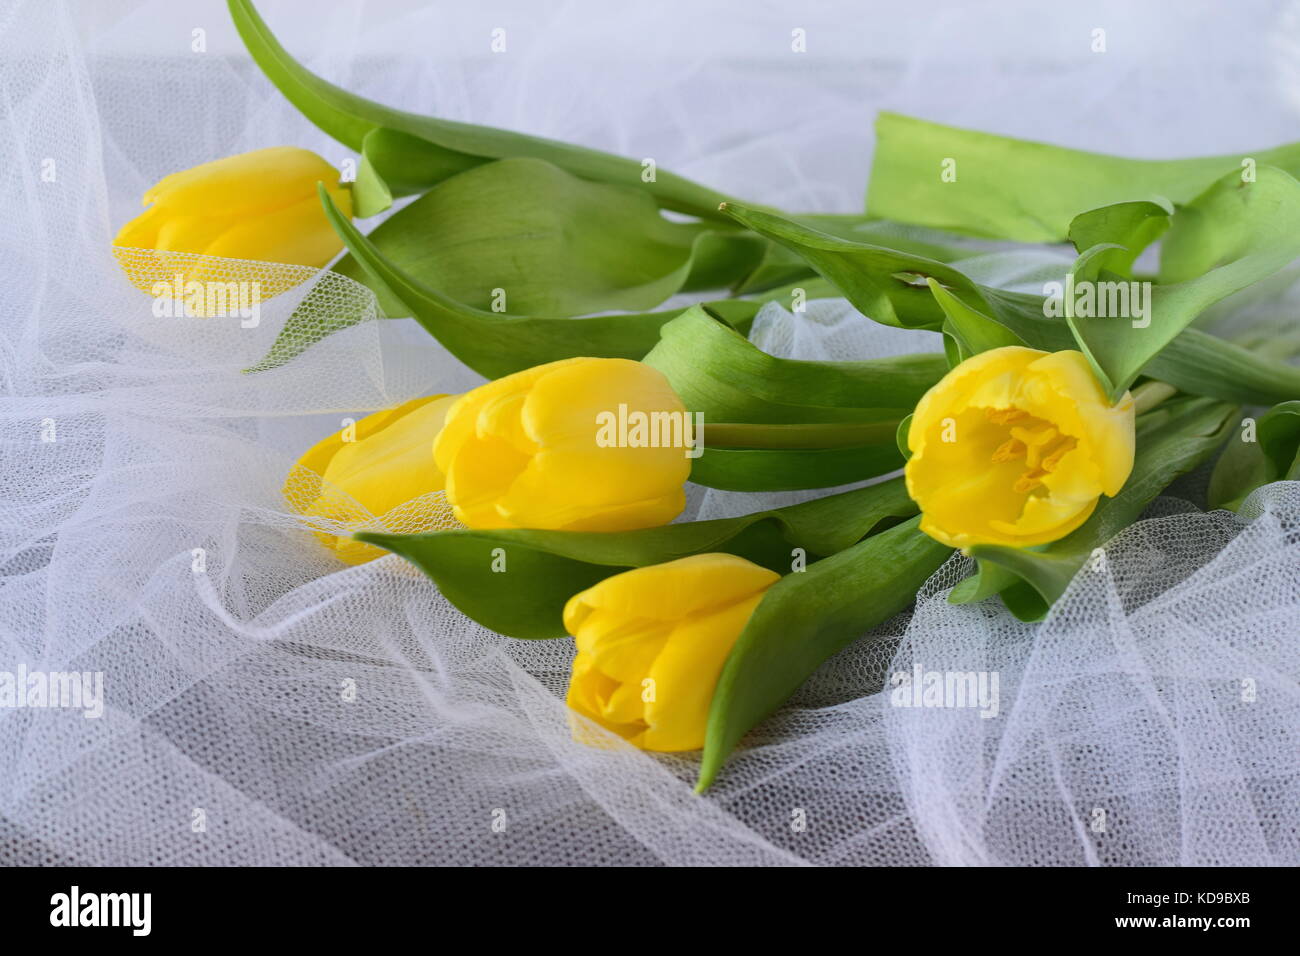 Yellow tulips on a white airy cloth texture Stock Photo